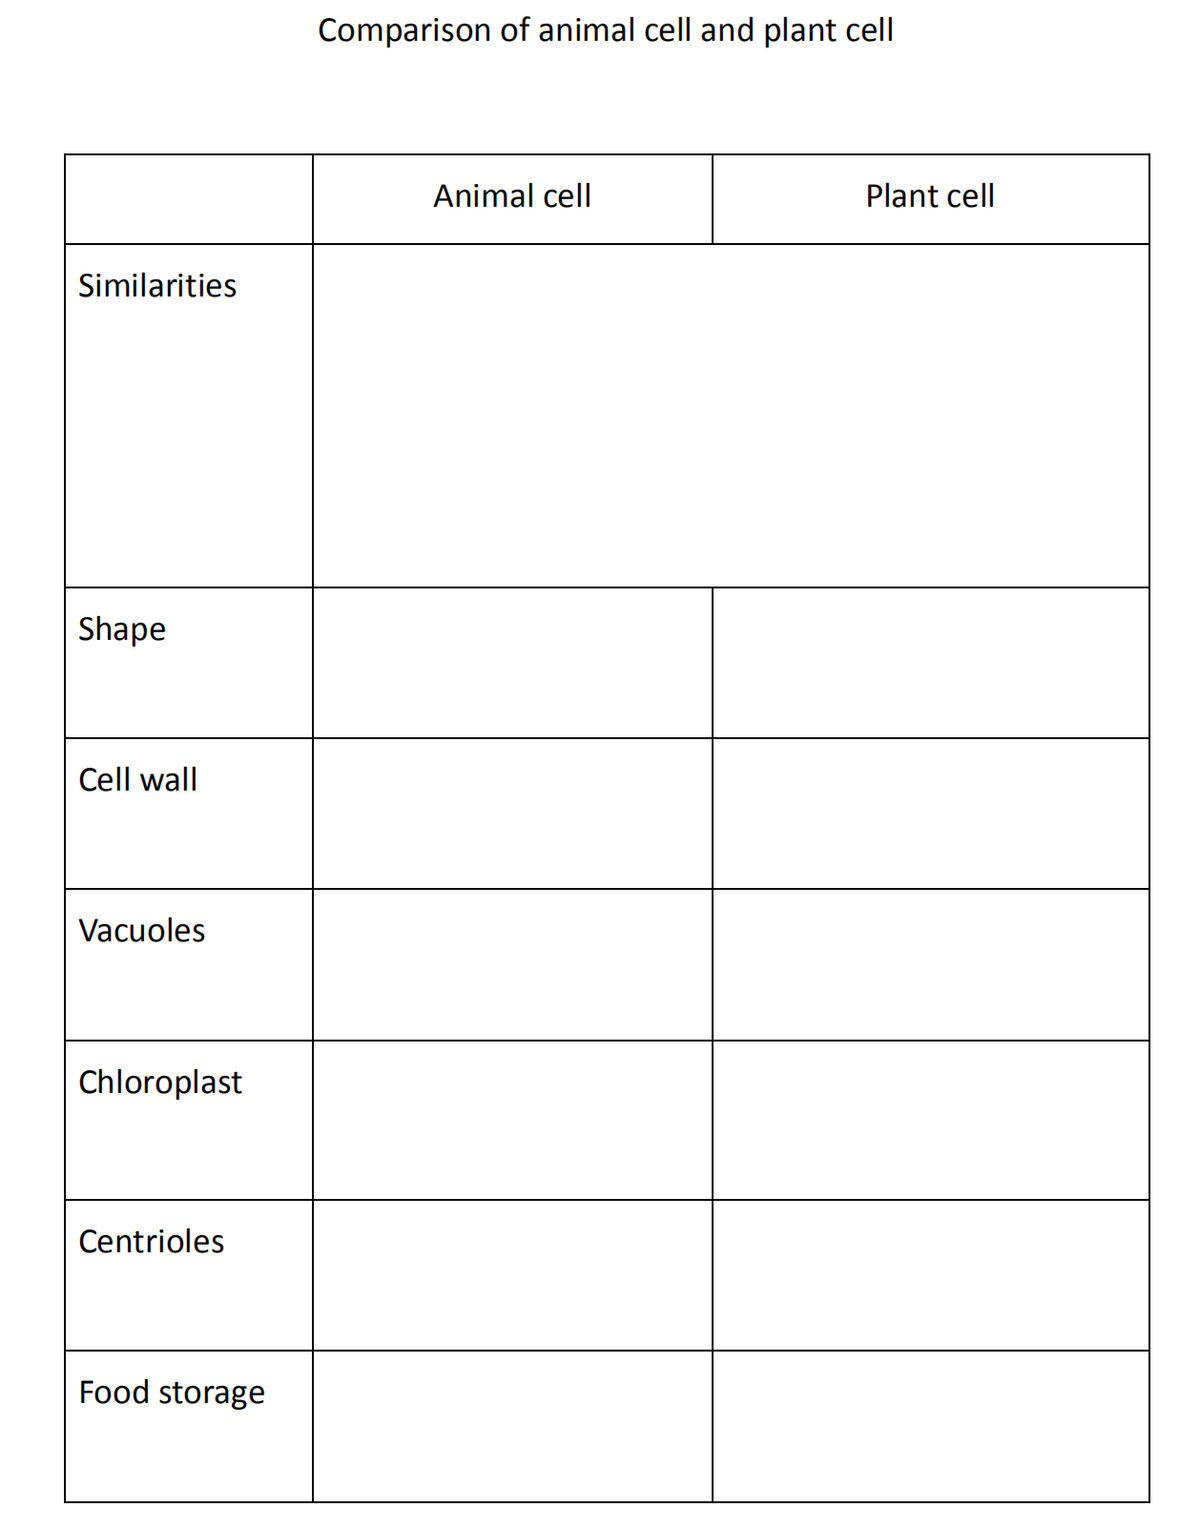 Comparison of animal cell and plant cell
Animal cell
Plant cell
Similarities
Shape
Cell wall
Vacuoles
Chloroplast
Centrioles
Food storage
